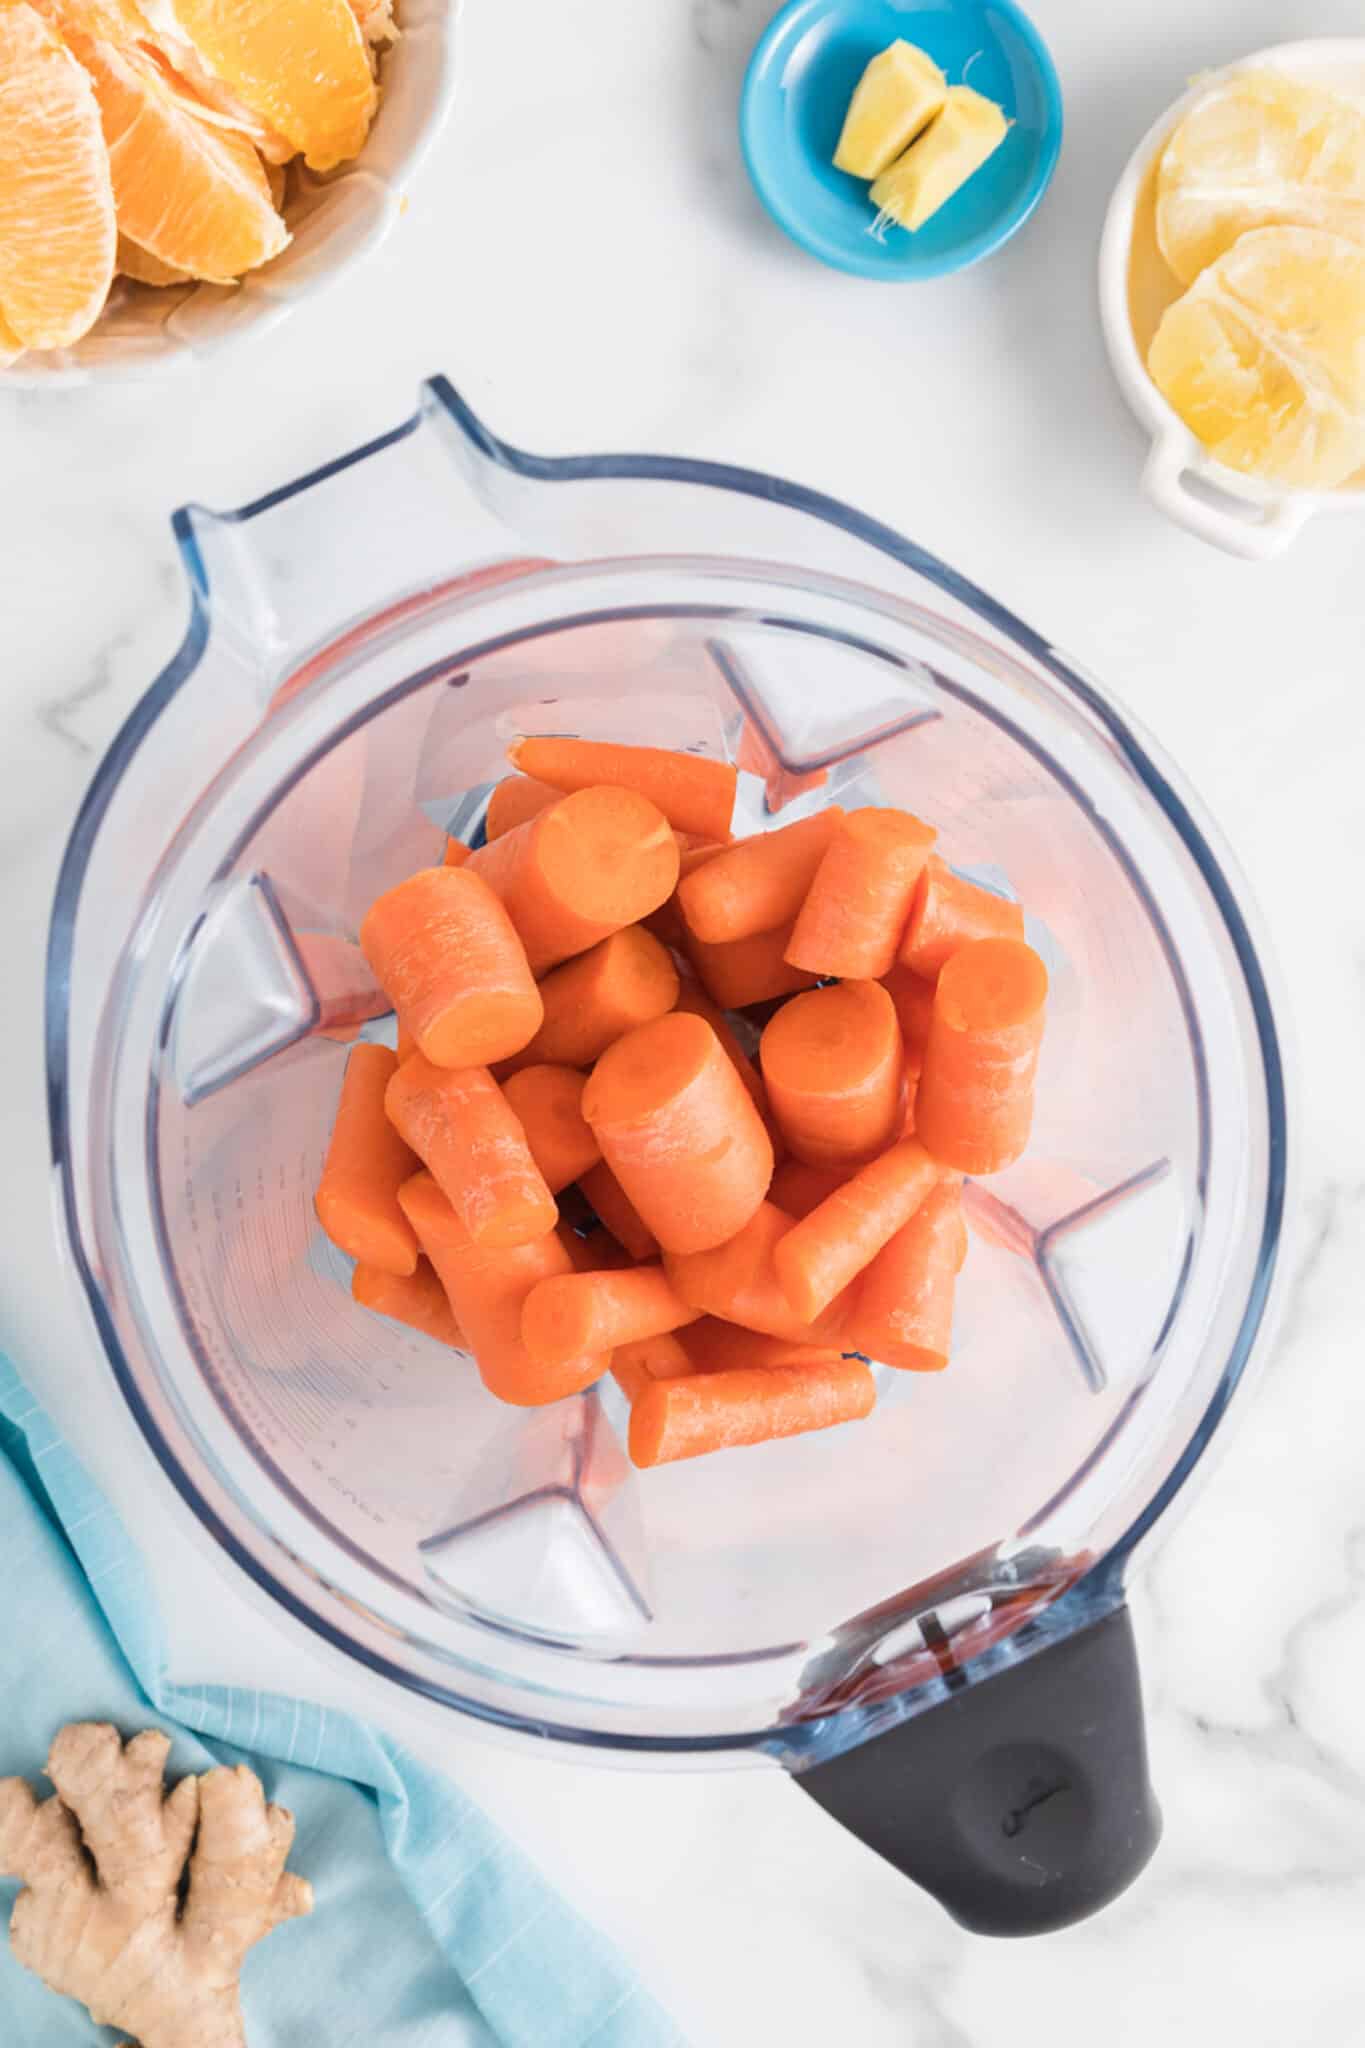 Chopped carrots in the jar of a high powered blender.